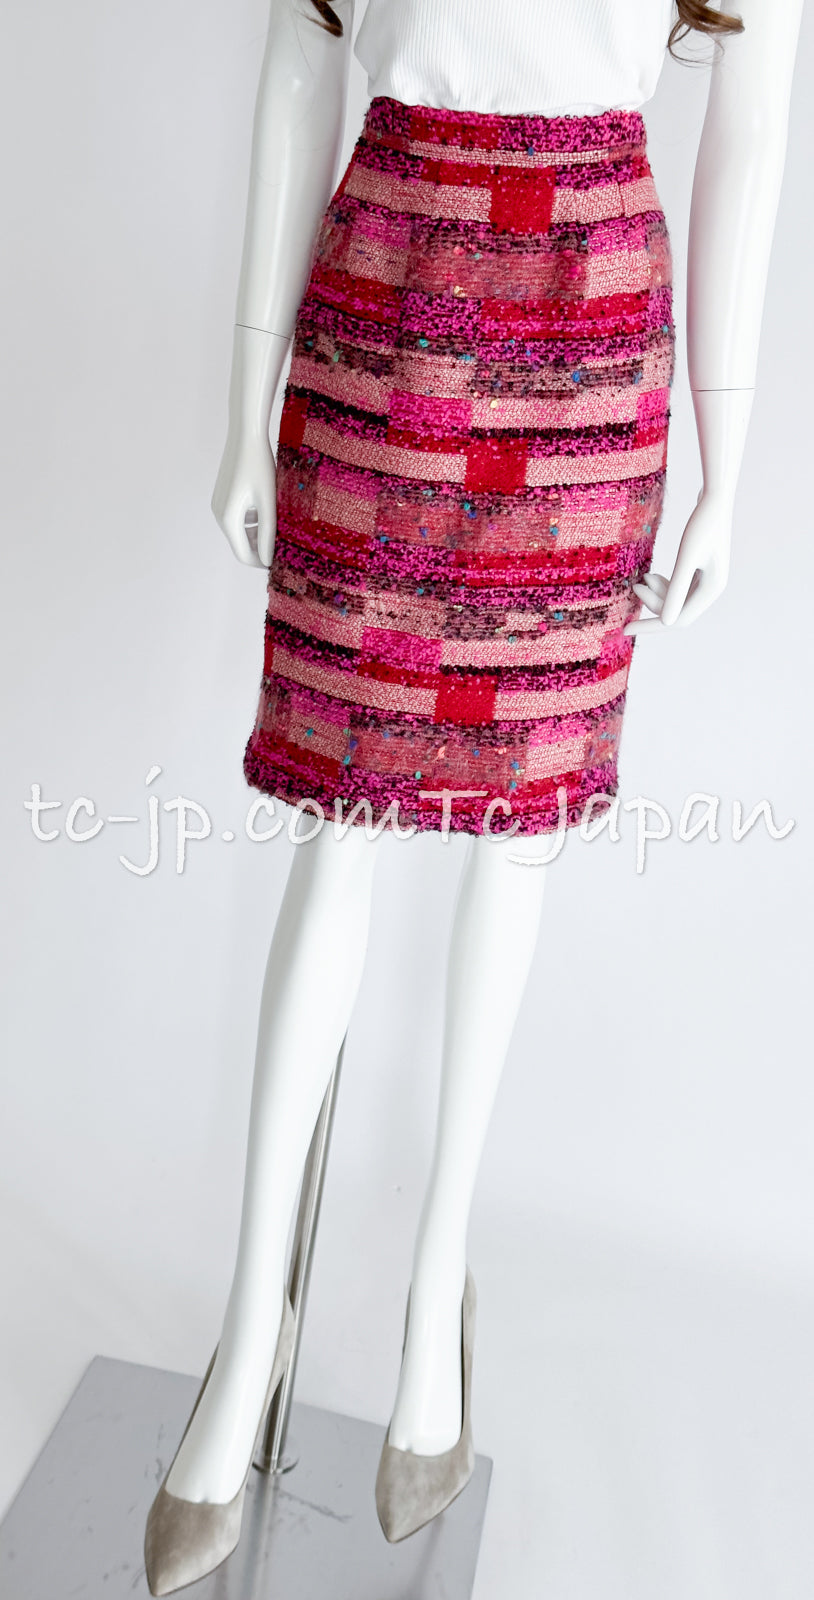 CHANEL 91A Vintage Pink Red Multicolor Tweed Skirt Matelasse Buttons 36 38  シャネル ヴィンテージ・ピンク・レッド・マトラッセボタン・ツイード・スカート 即発